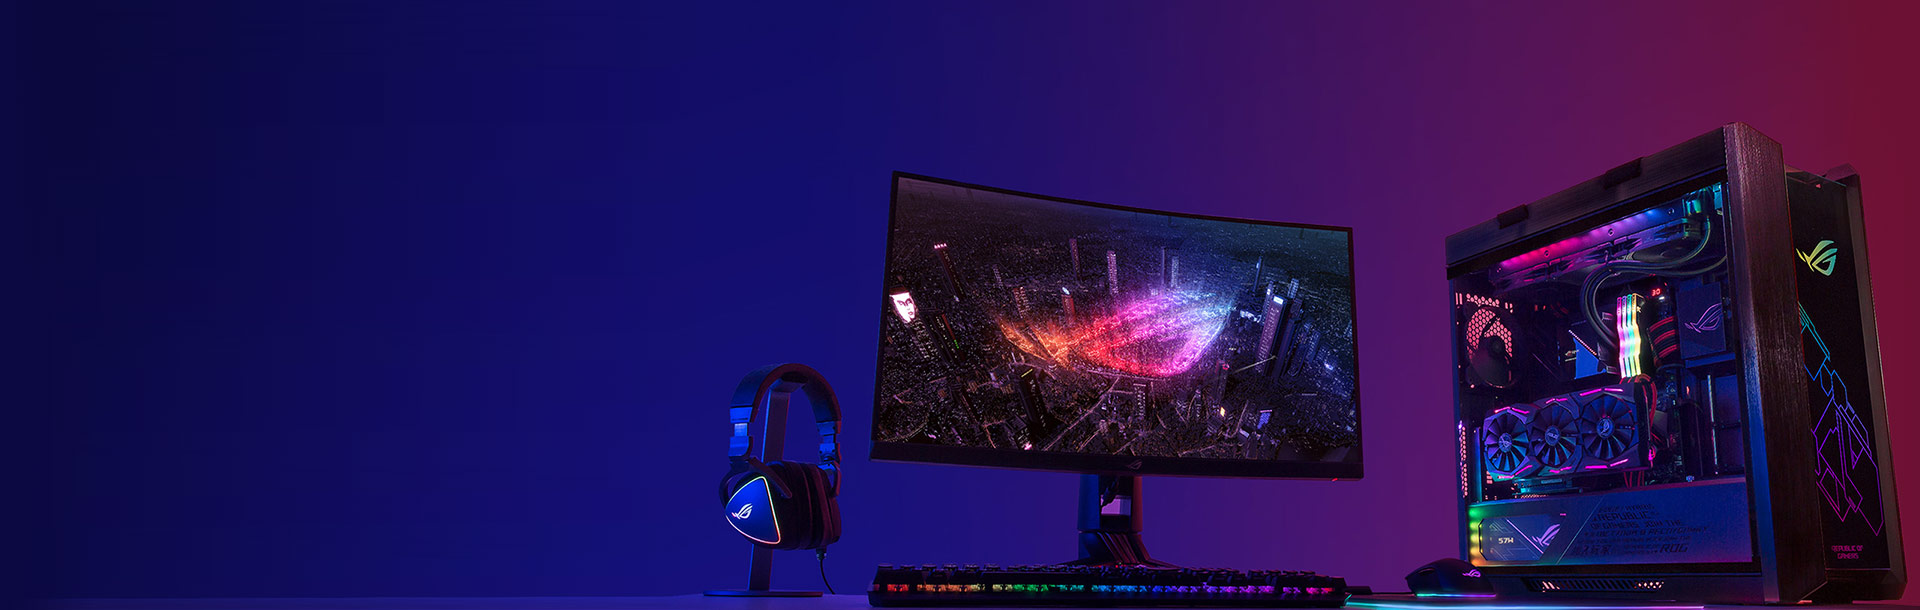 Gaming PC setup featuring ROG Strix products and RGB lighting